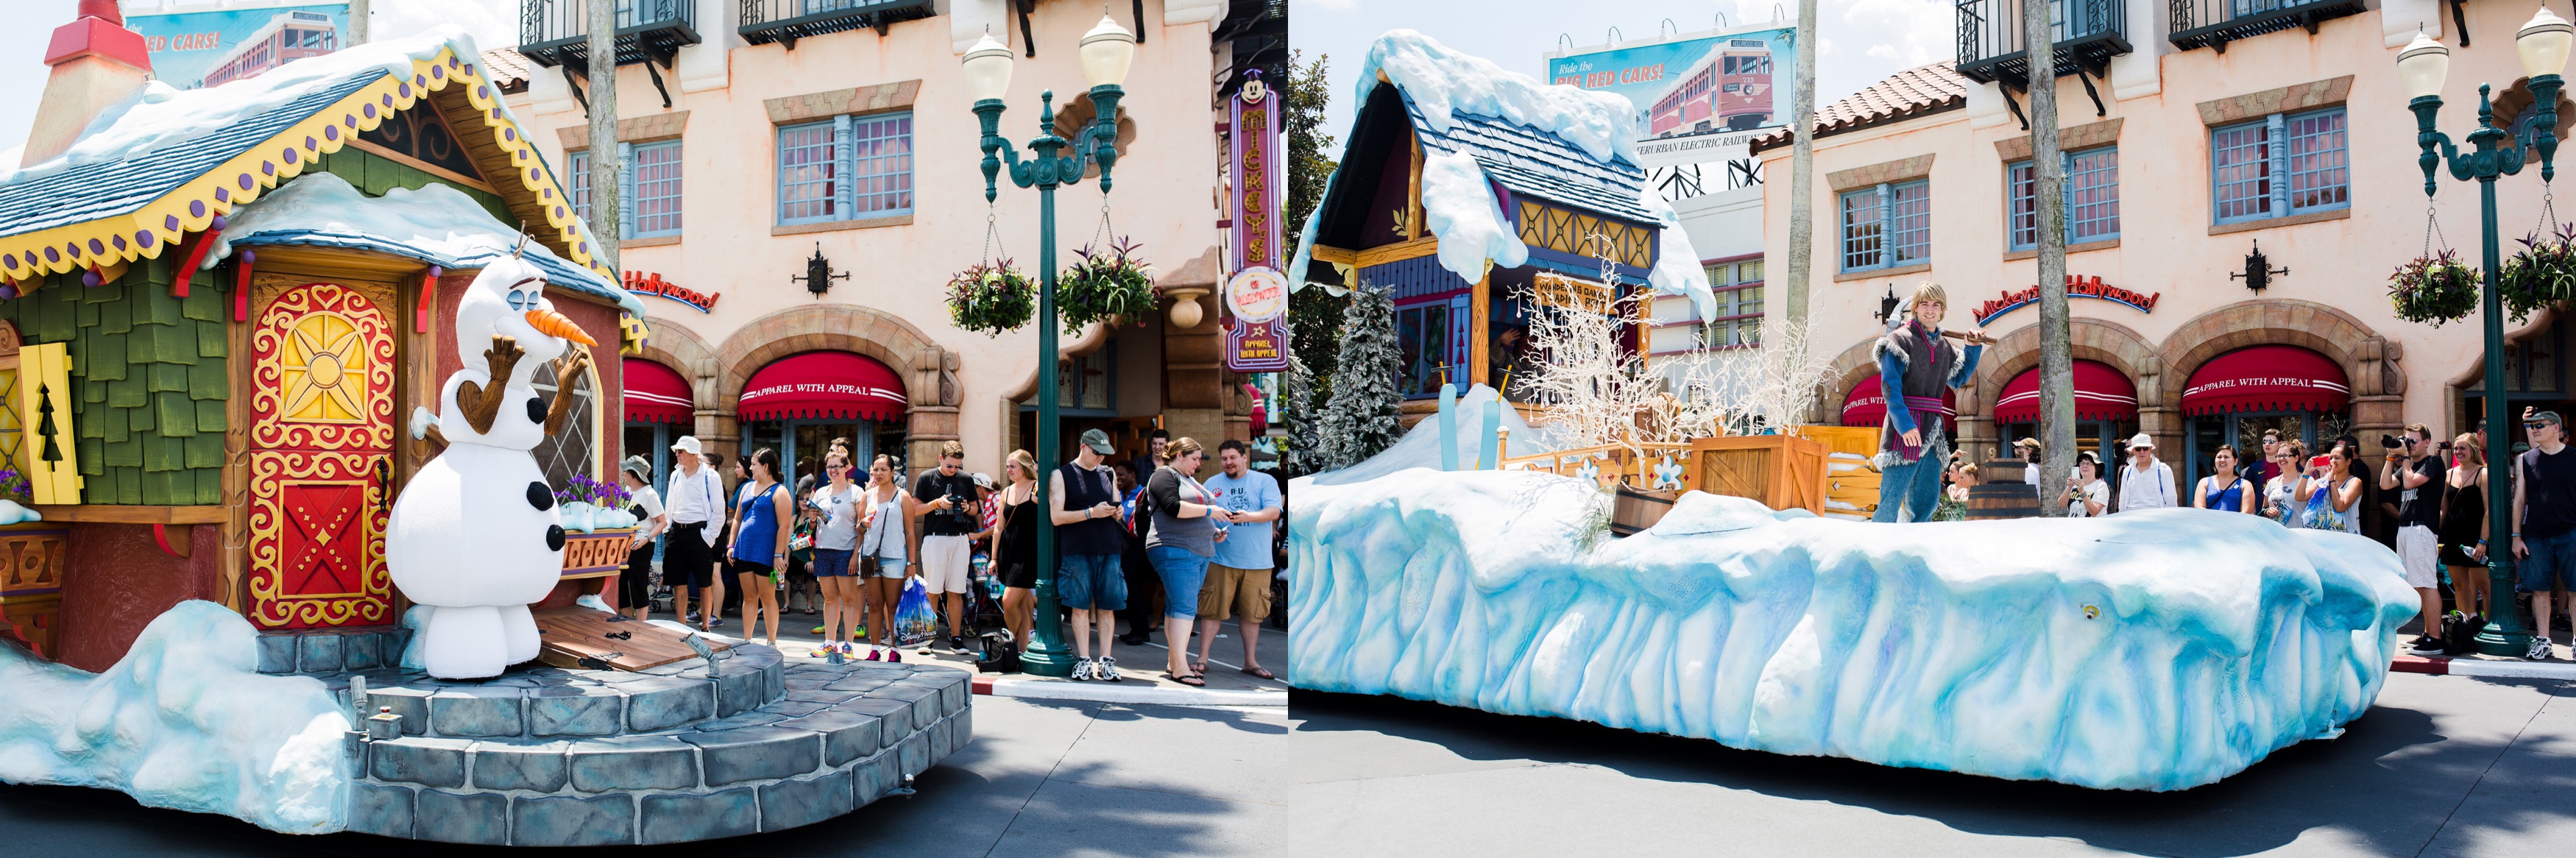 Frozen Fever, Where to find Frozen at Walt Disney World, Magic Kingdom, Magic for Miles, Frozen at Hollywood Studios